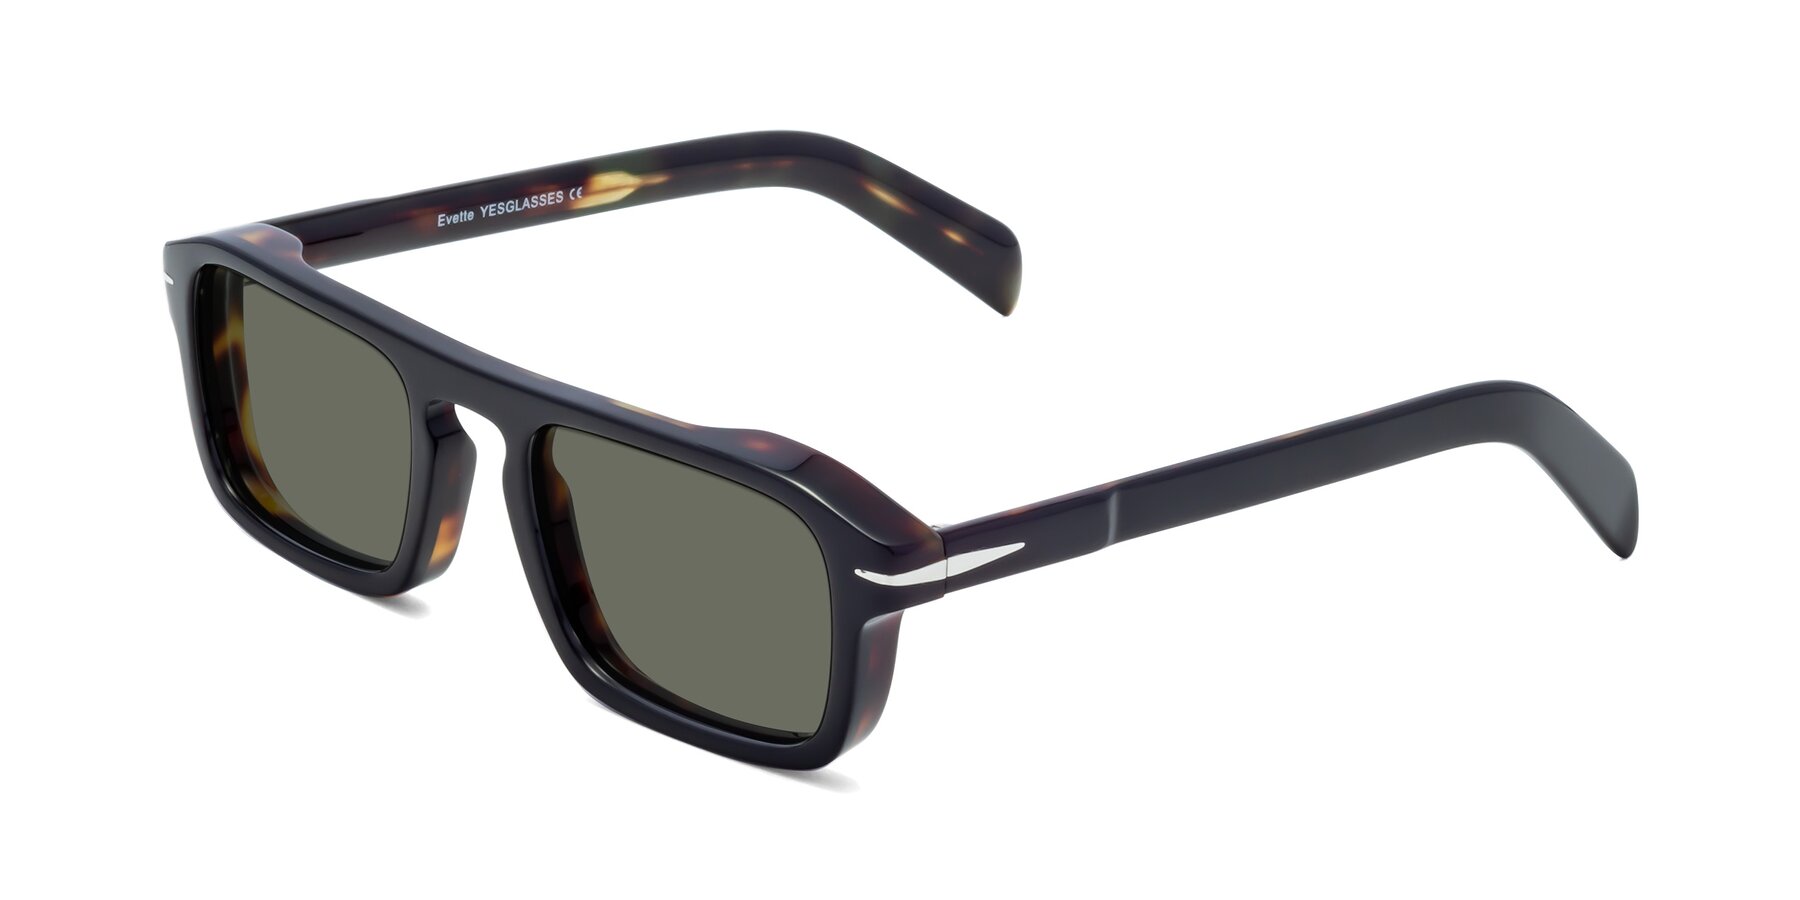 Angle of Evette in Black-Tortoise with Gray Polarized Lenses